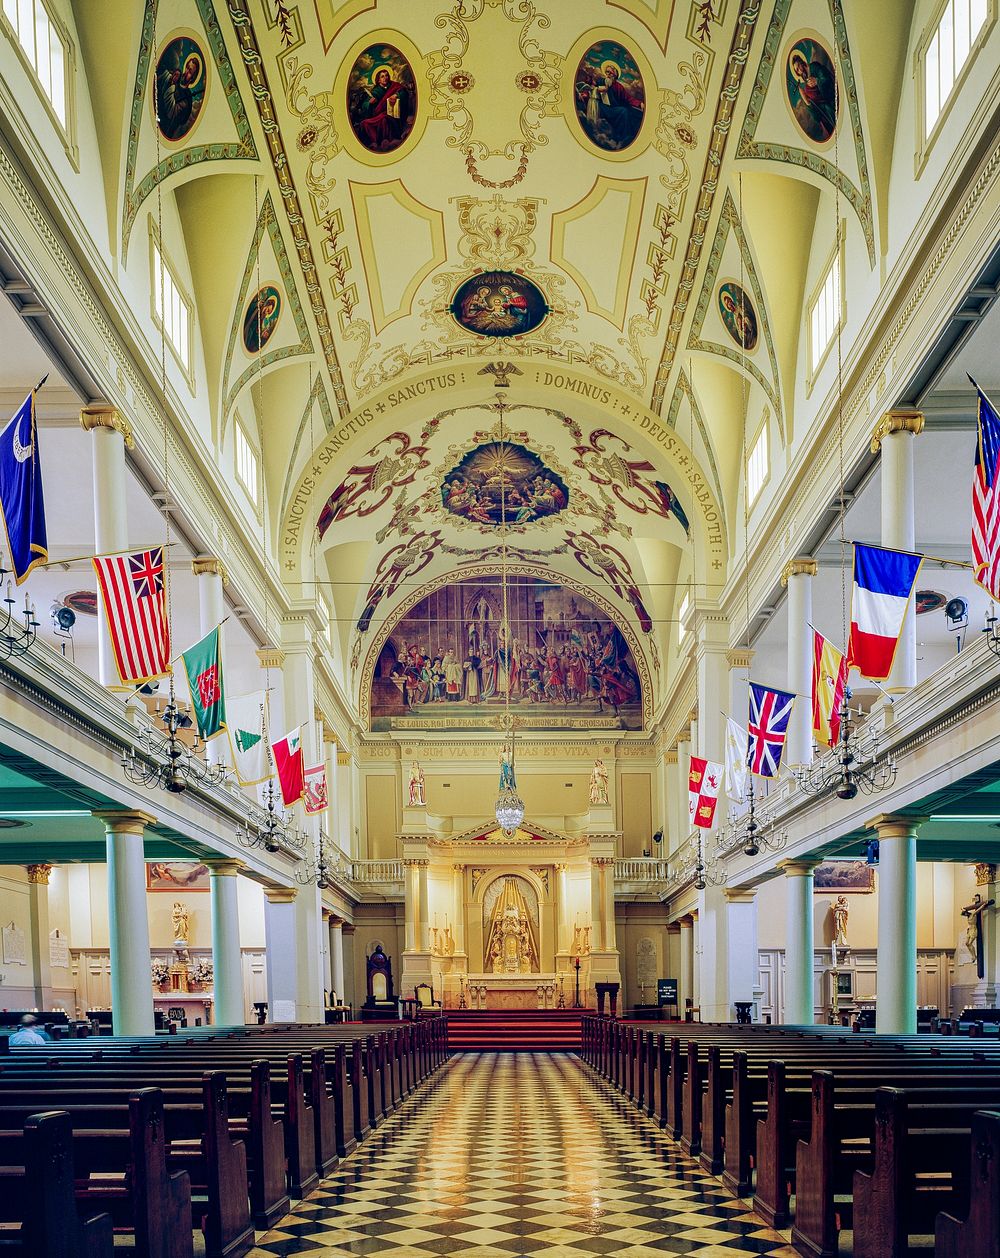 St. Louis Cathedral Interior in New Orleans, Original image from Carol M. Highsmith&rsquo;s America, Library of Congress…